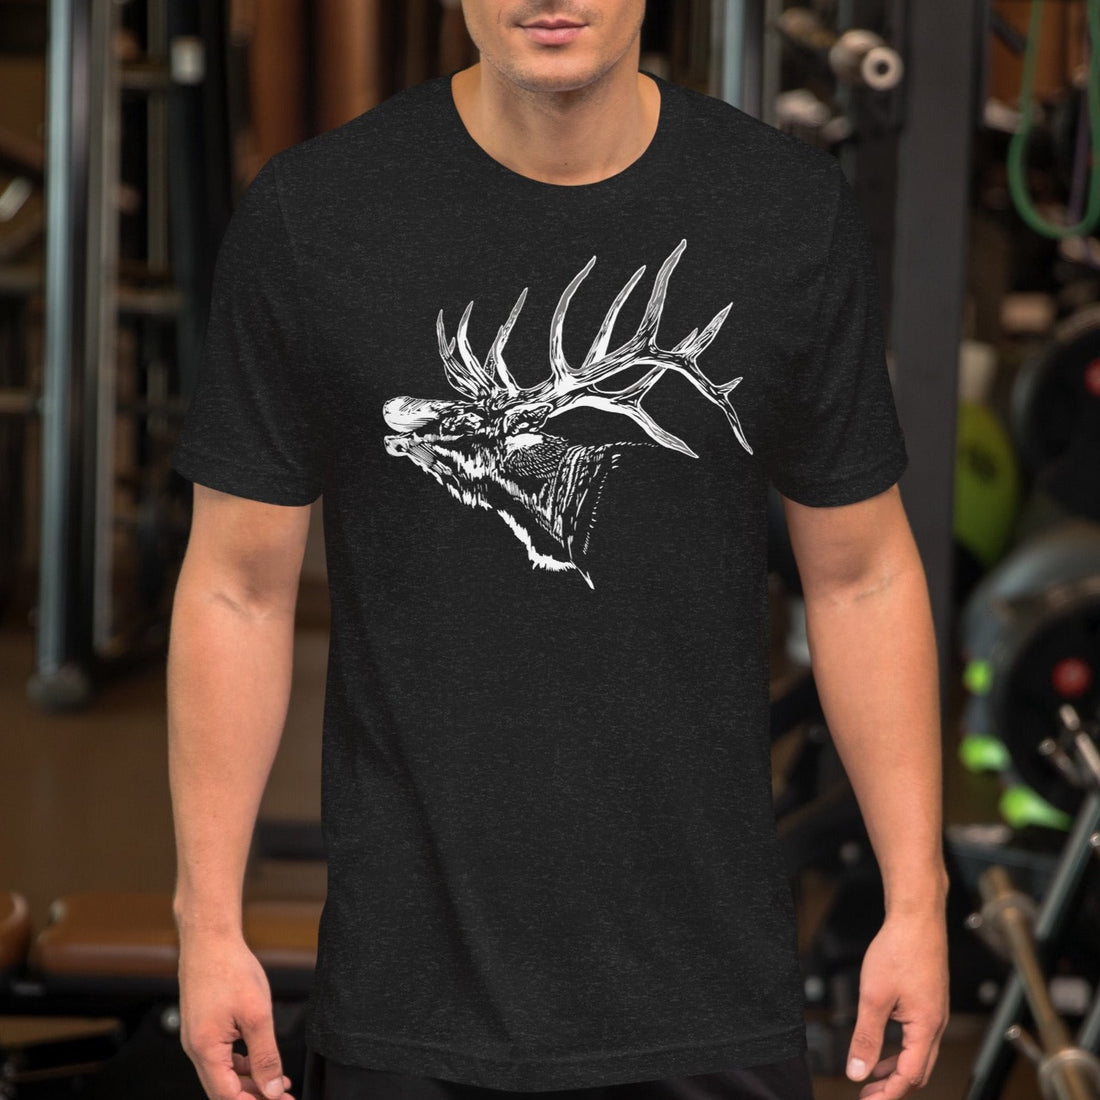  Man at the gym wearing an elk logo t shirt in black and white